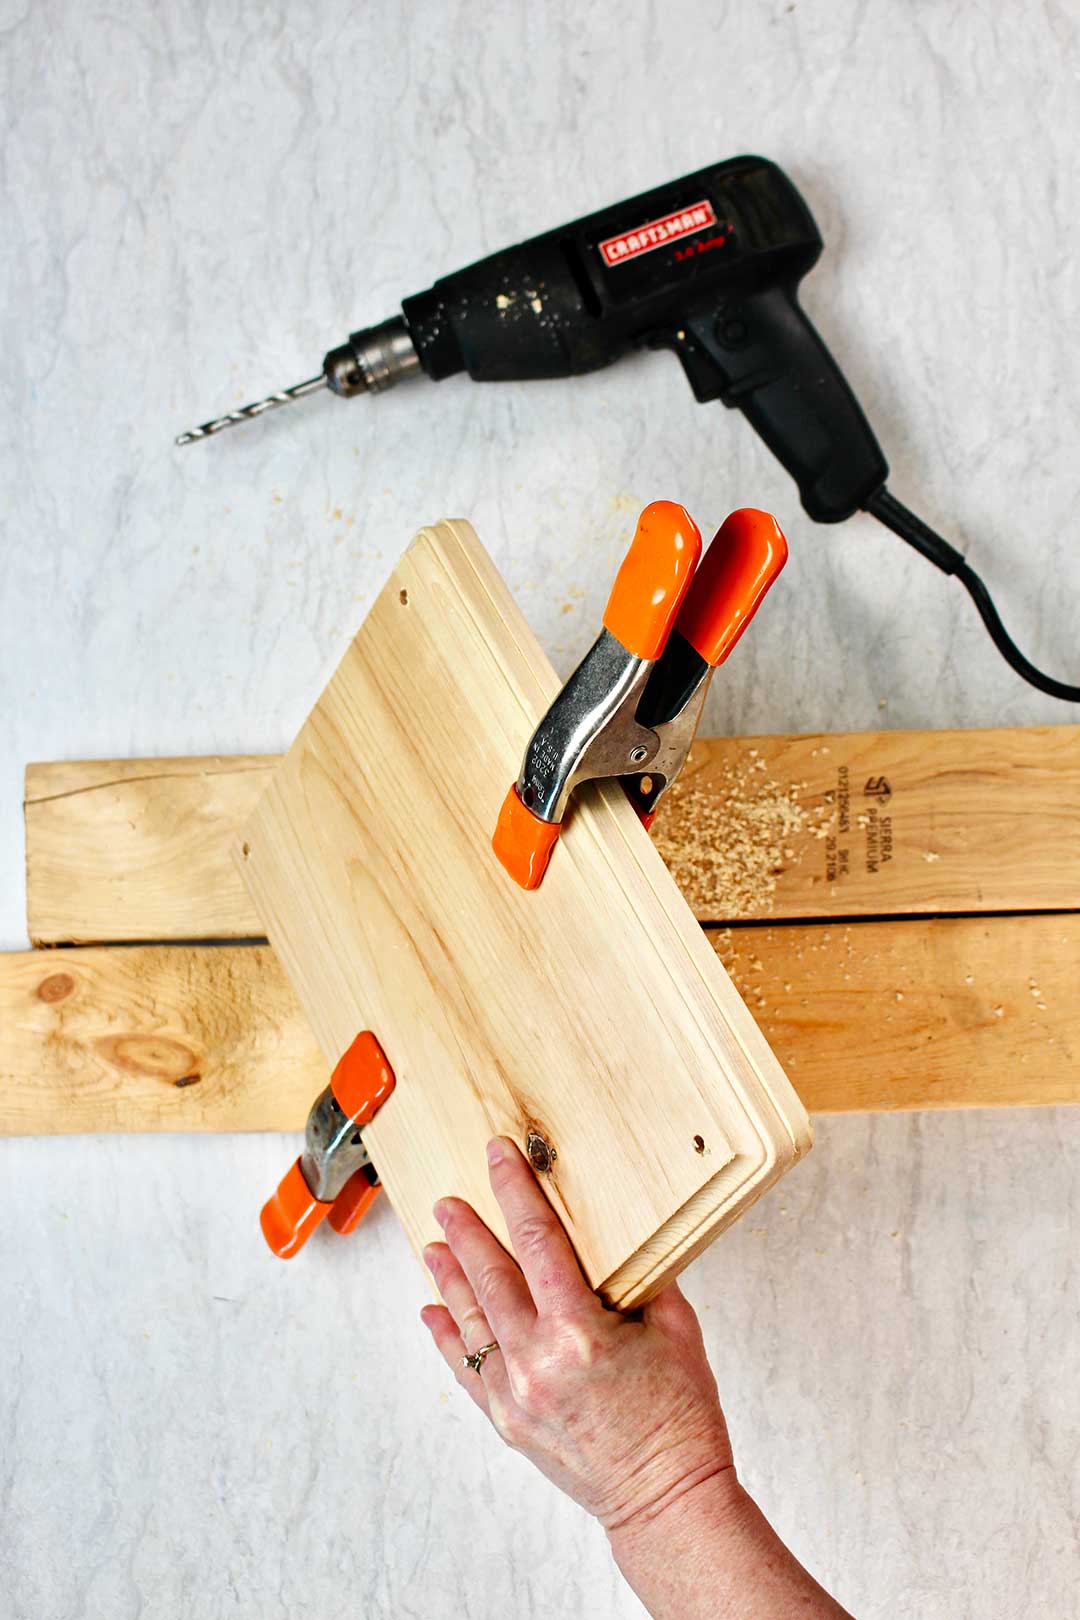 Hand holding two rectangular blocks of wood being held together with two orange clamps with 2x4 and black drill nearby.